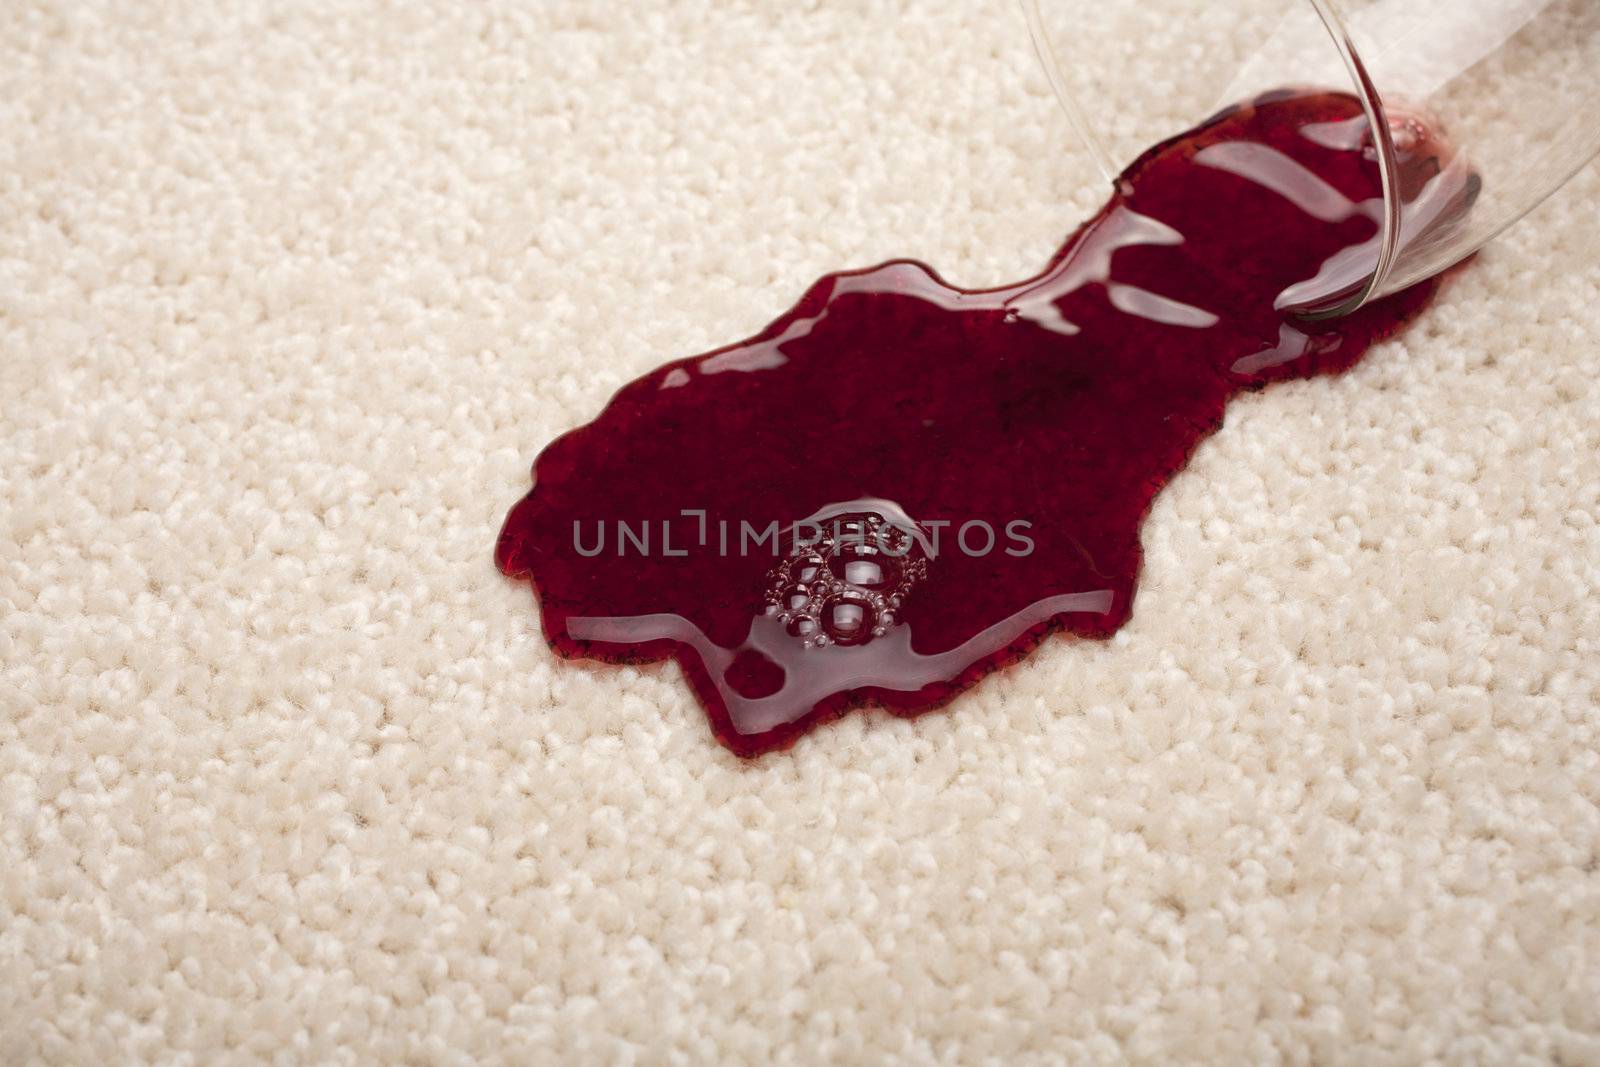 Spilled Red Wine on Carpet Accident Insurance Claim by Travelling-light